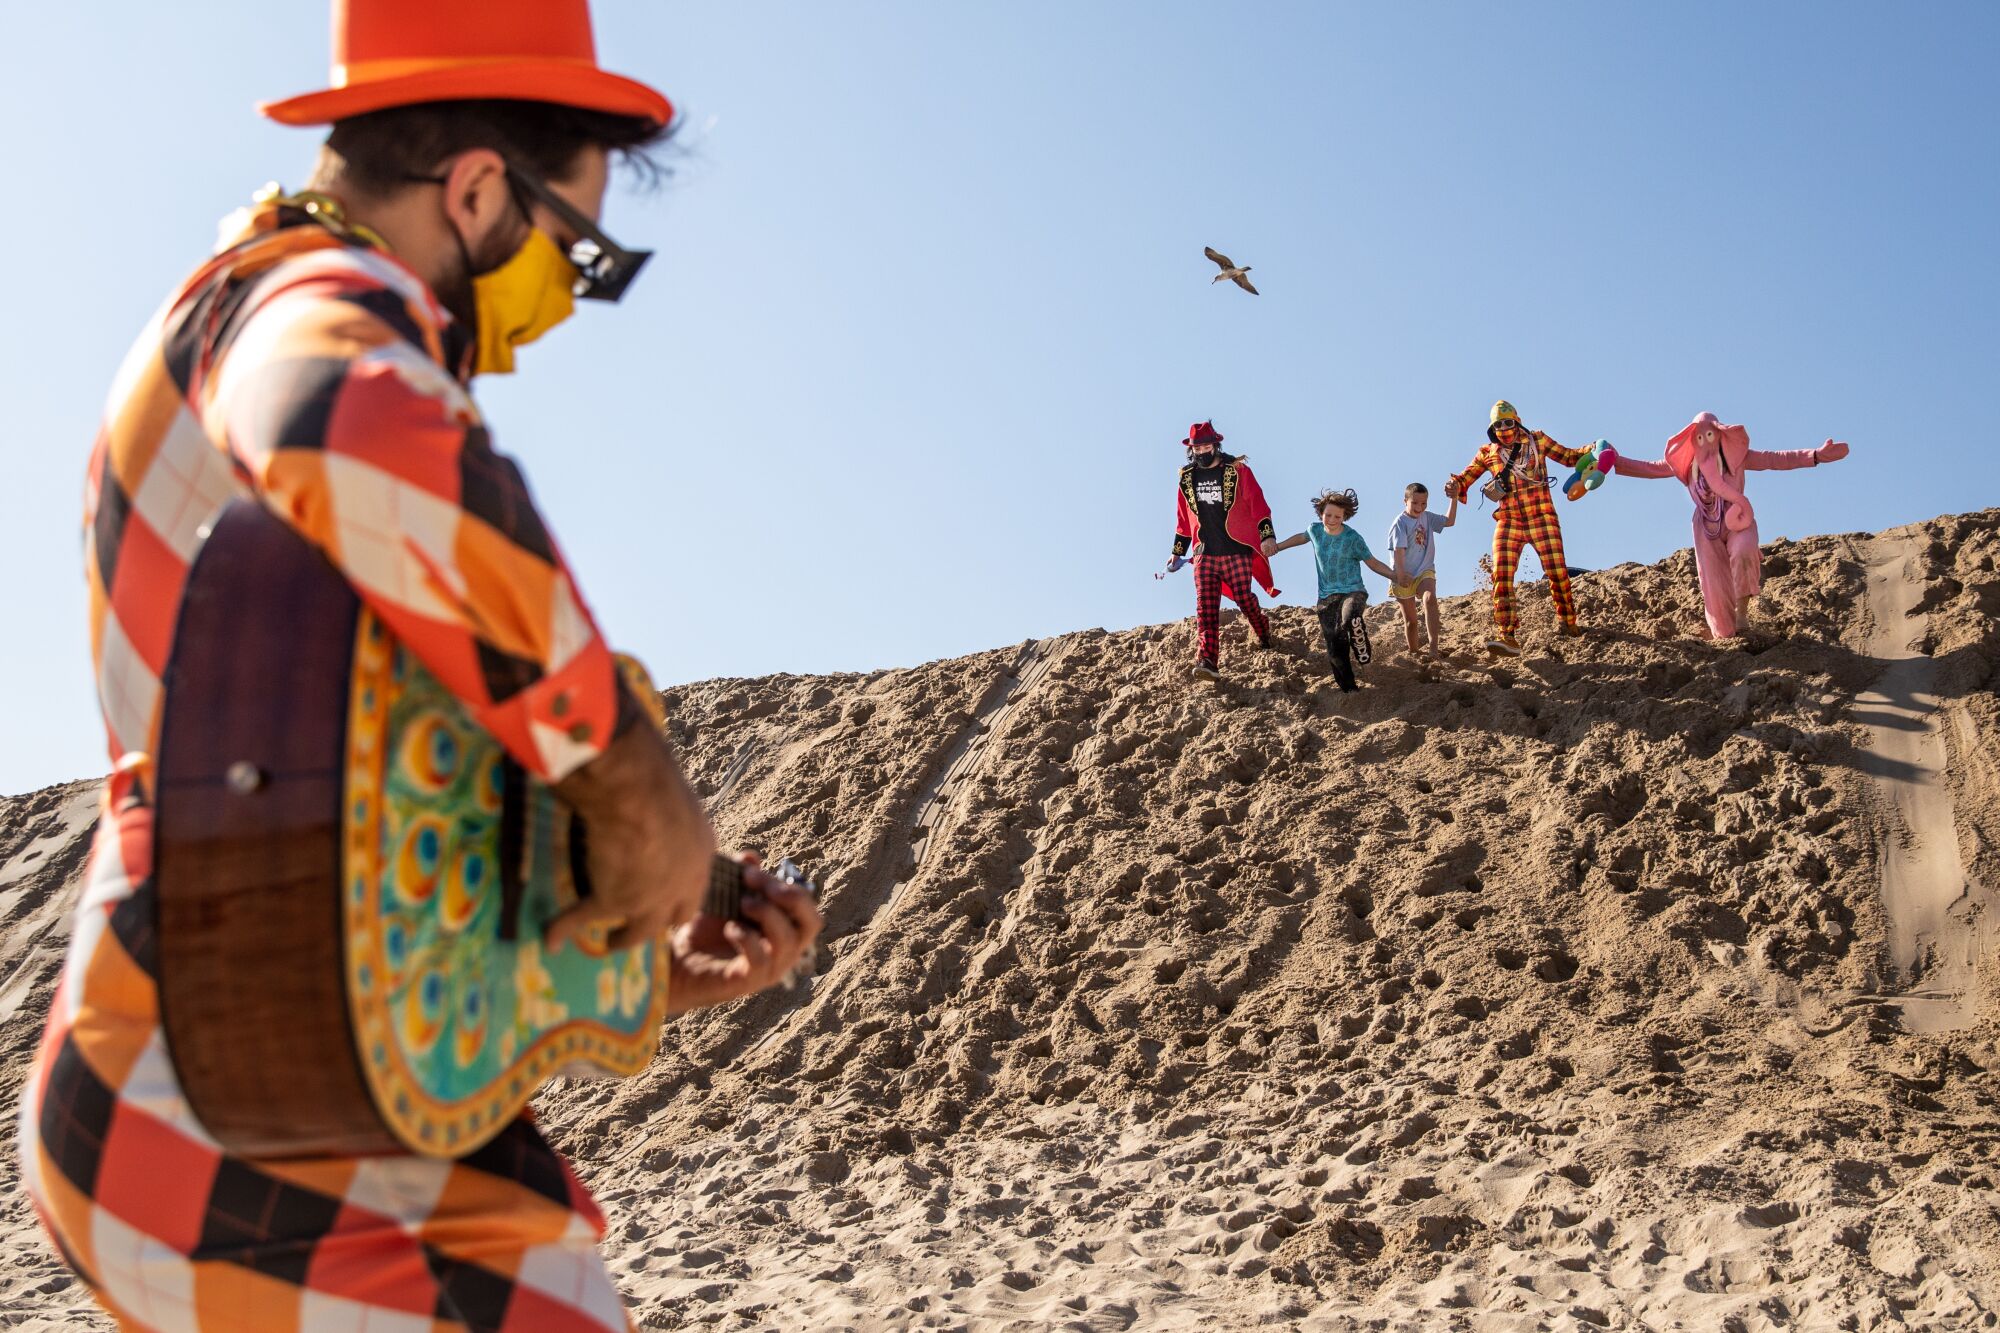 Daniel Drockton, in brightly colored outfit and hat, strums a guitar as people in costume descend a sand dune.